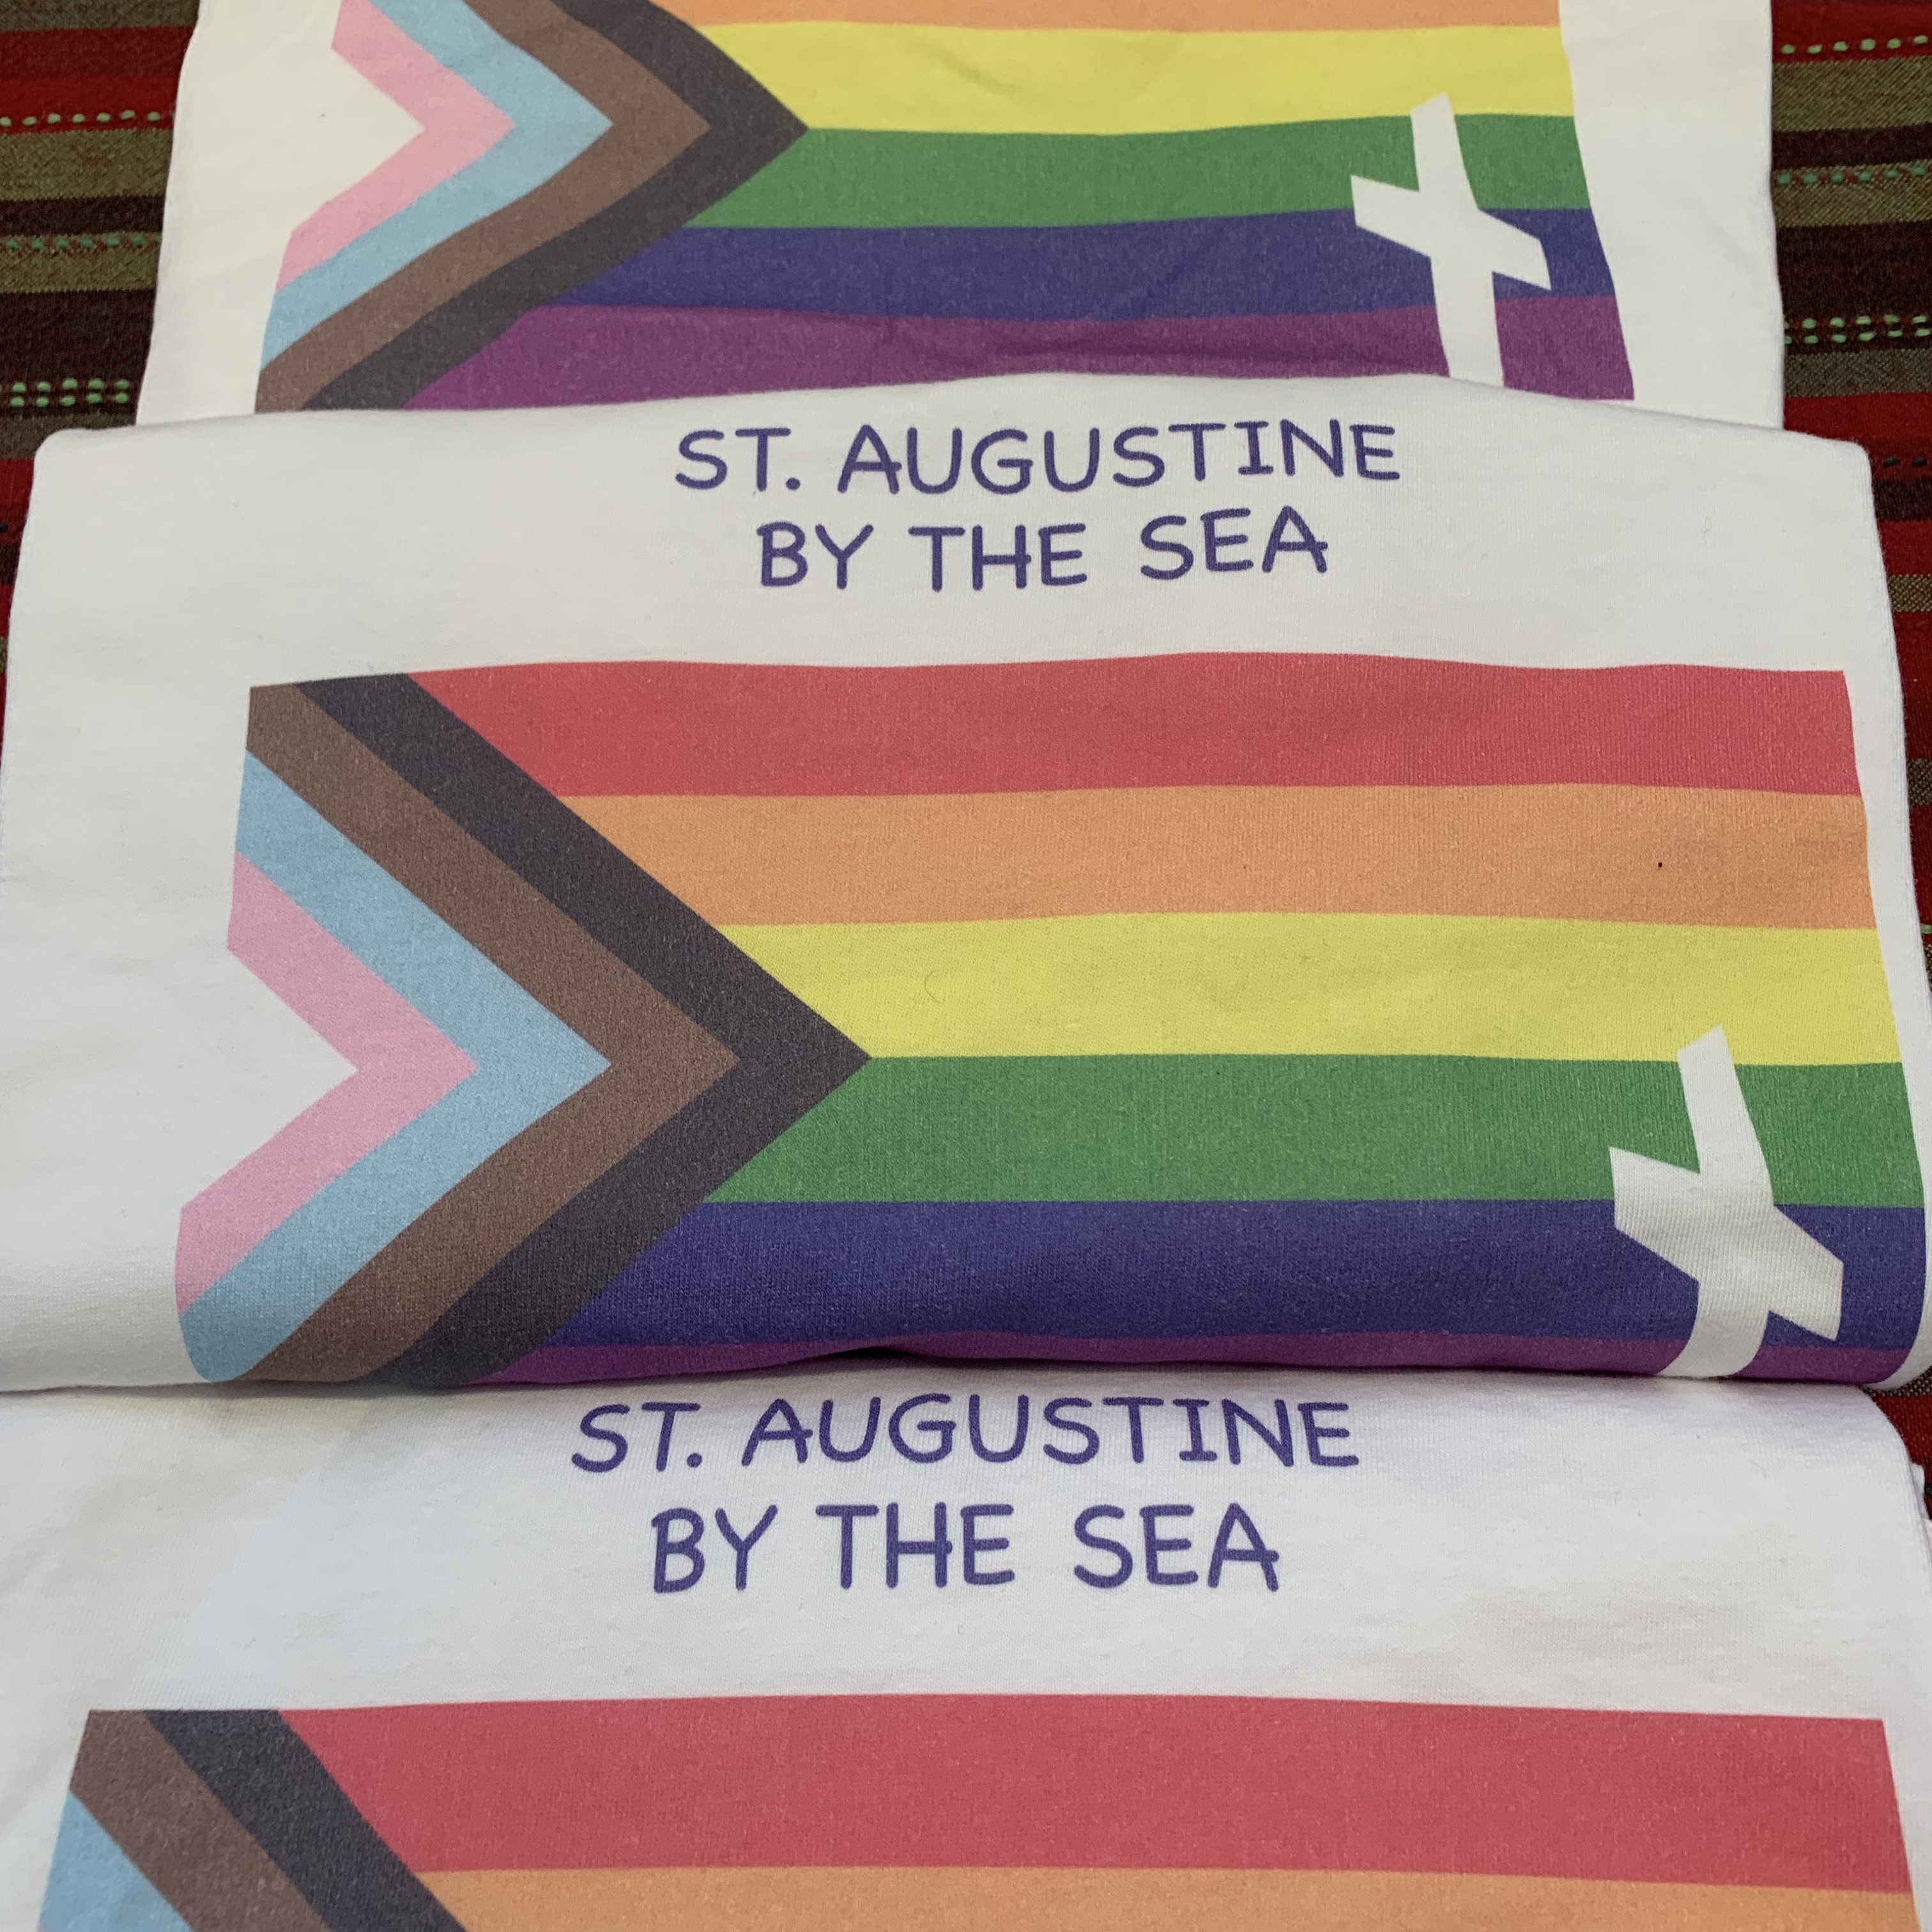 St. A's PRIDE tshirts for sale! St. Augustine bytheSea